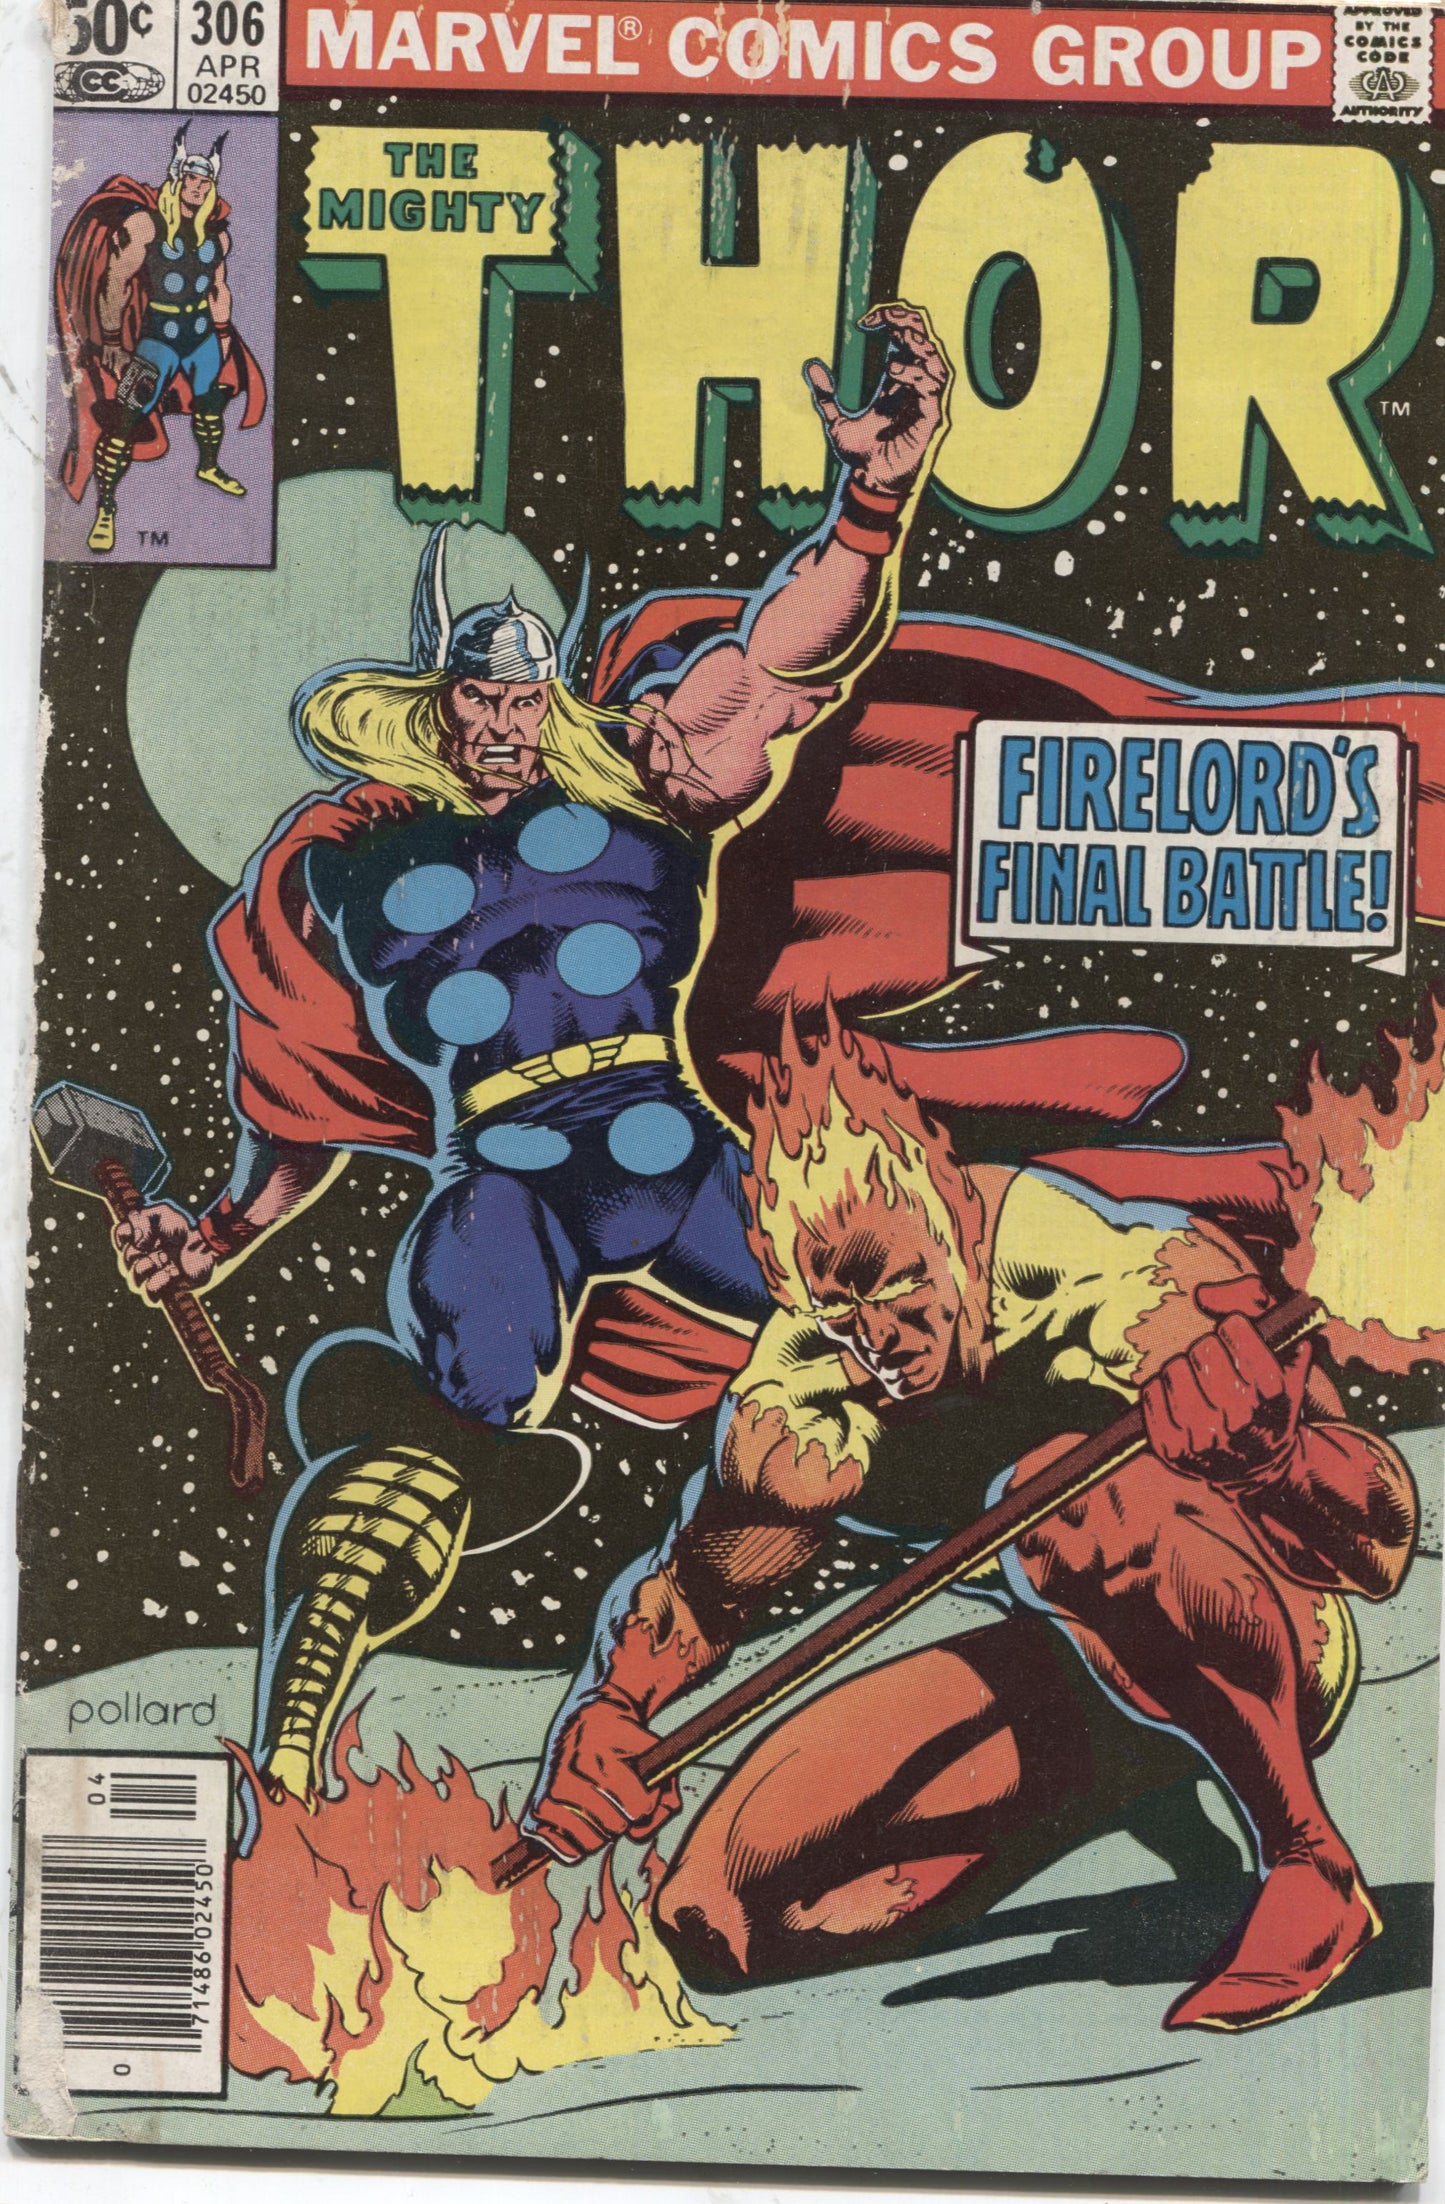 The Mighty Thor No. 306, "Firelord's Final Battle," Marvel Comics, April 1981